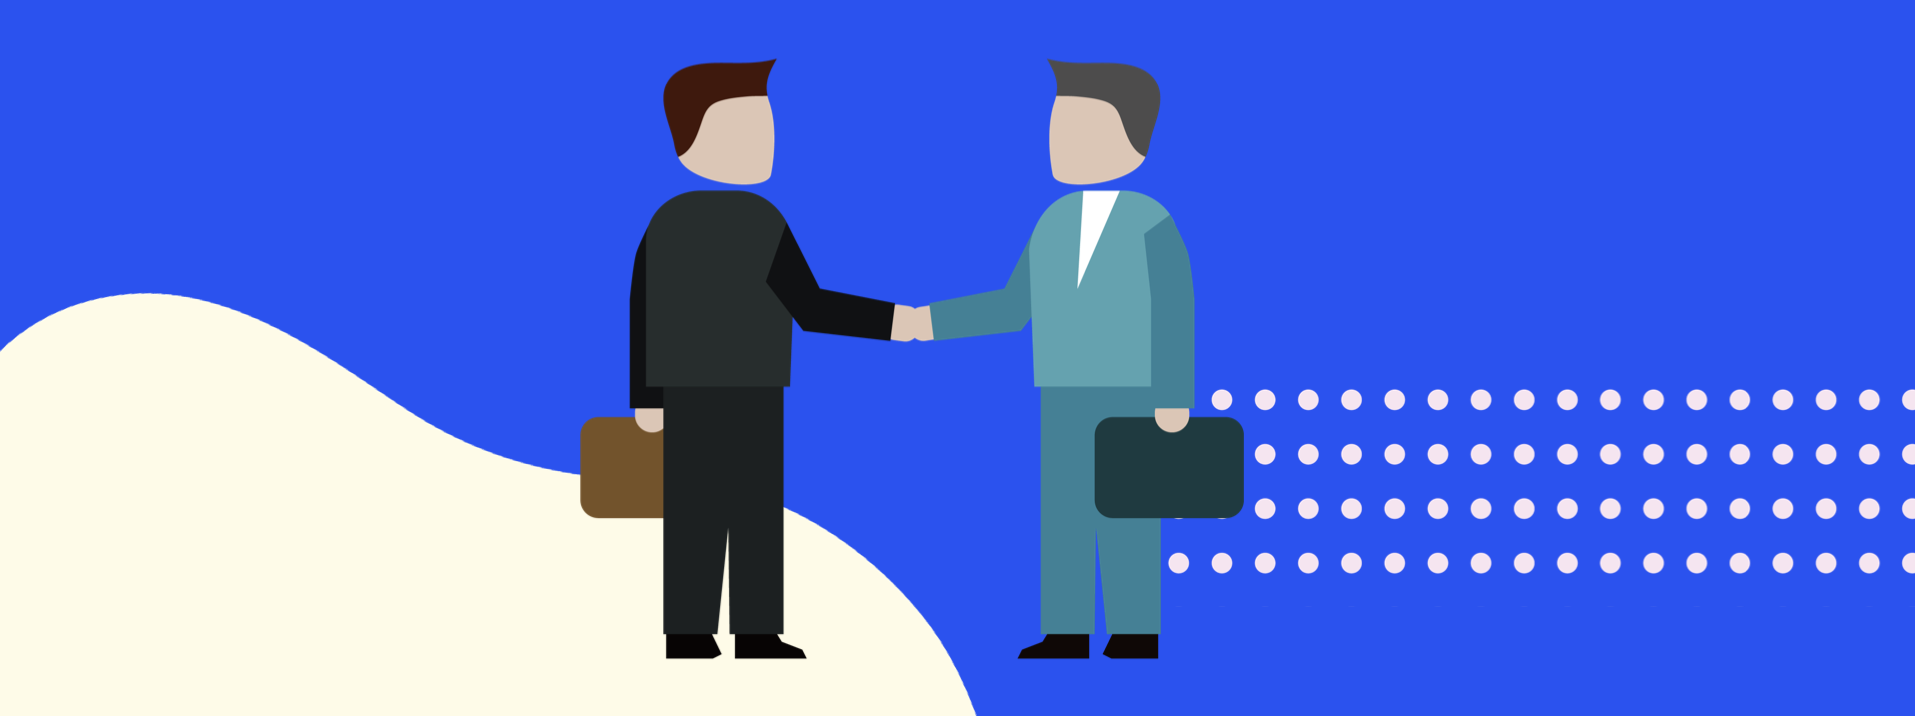 9 Proven Tips & Tricks To Build Great Professional Connections